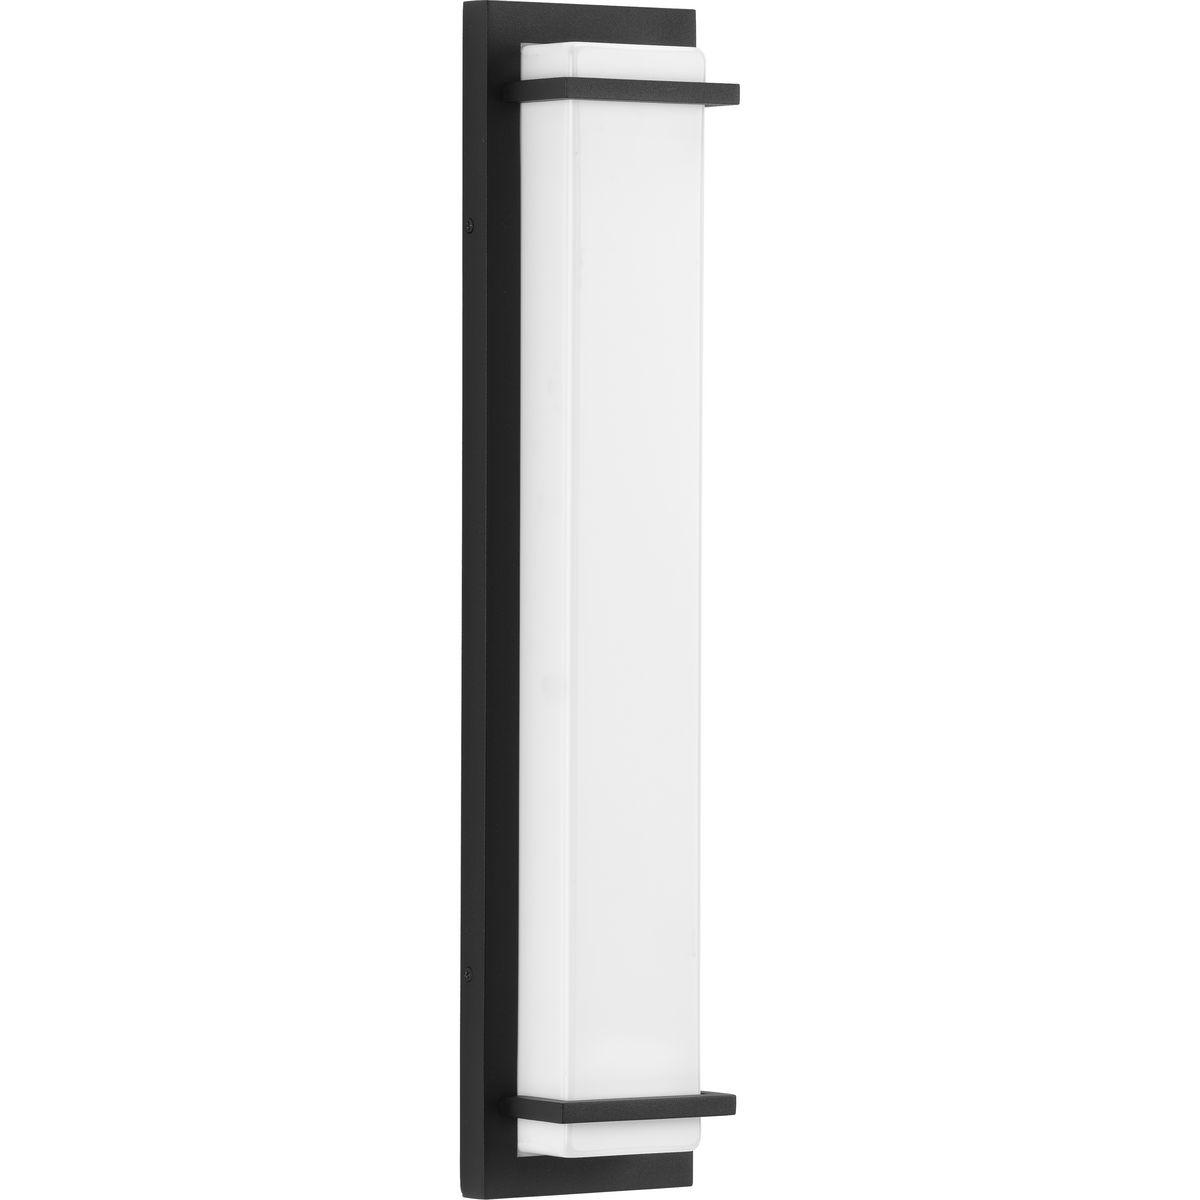 Hubbell P560211-031-30 Transform the mundane everyday with the sophisticated styling of this LED outdoor sconce. A smooth, elongated frame with a black finish dominates the design and exudes a modern attitude perfect for indoor or outdoor spaces. Beautiful acrylic shades stretc